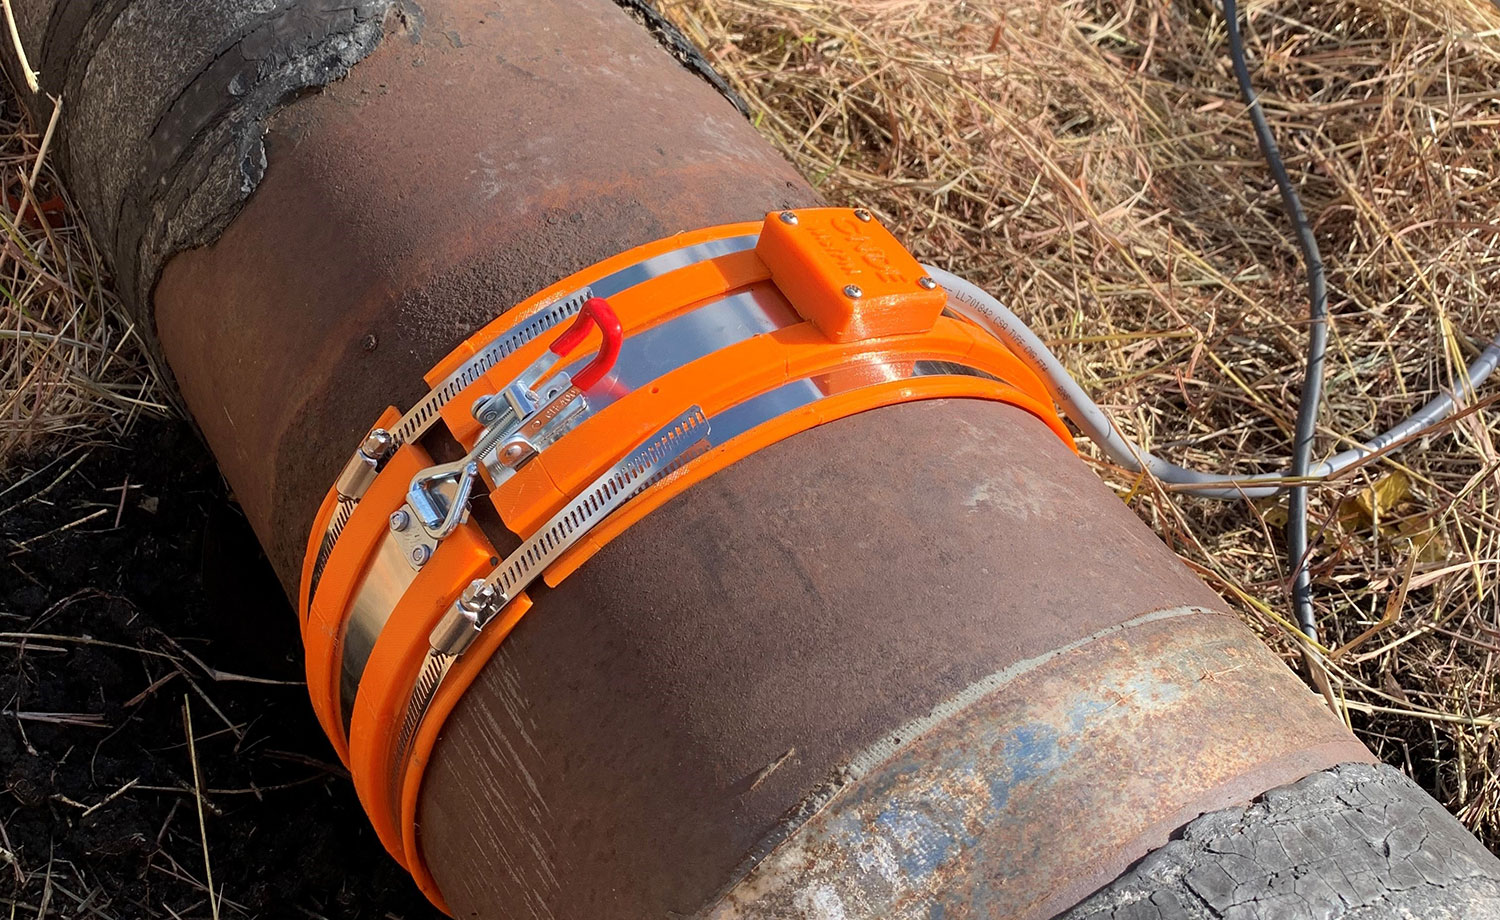 New corrosion-detecting tech detects leaks in pipes before they occur - Inceptive Mind